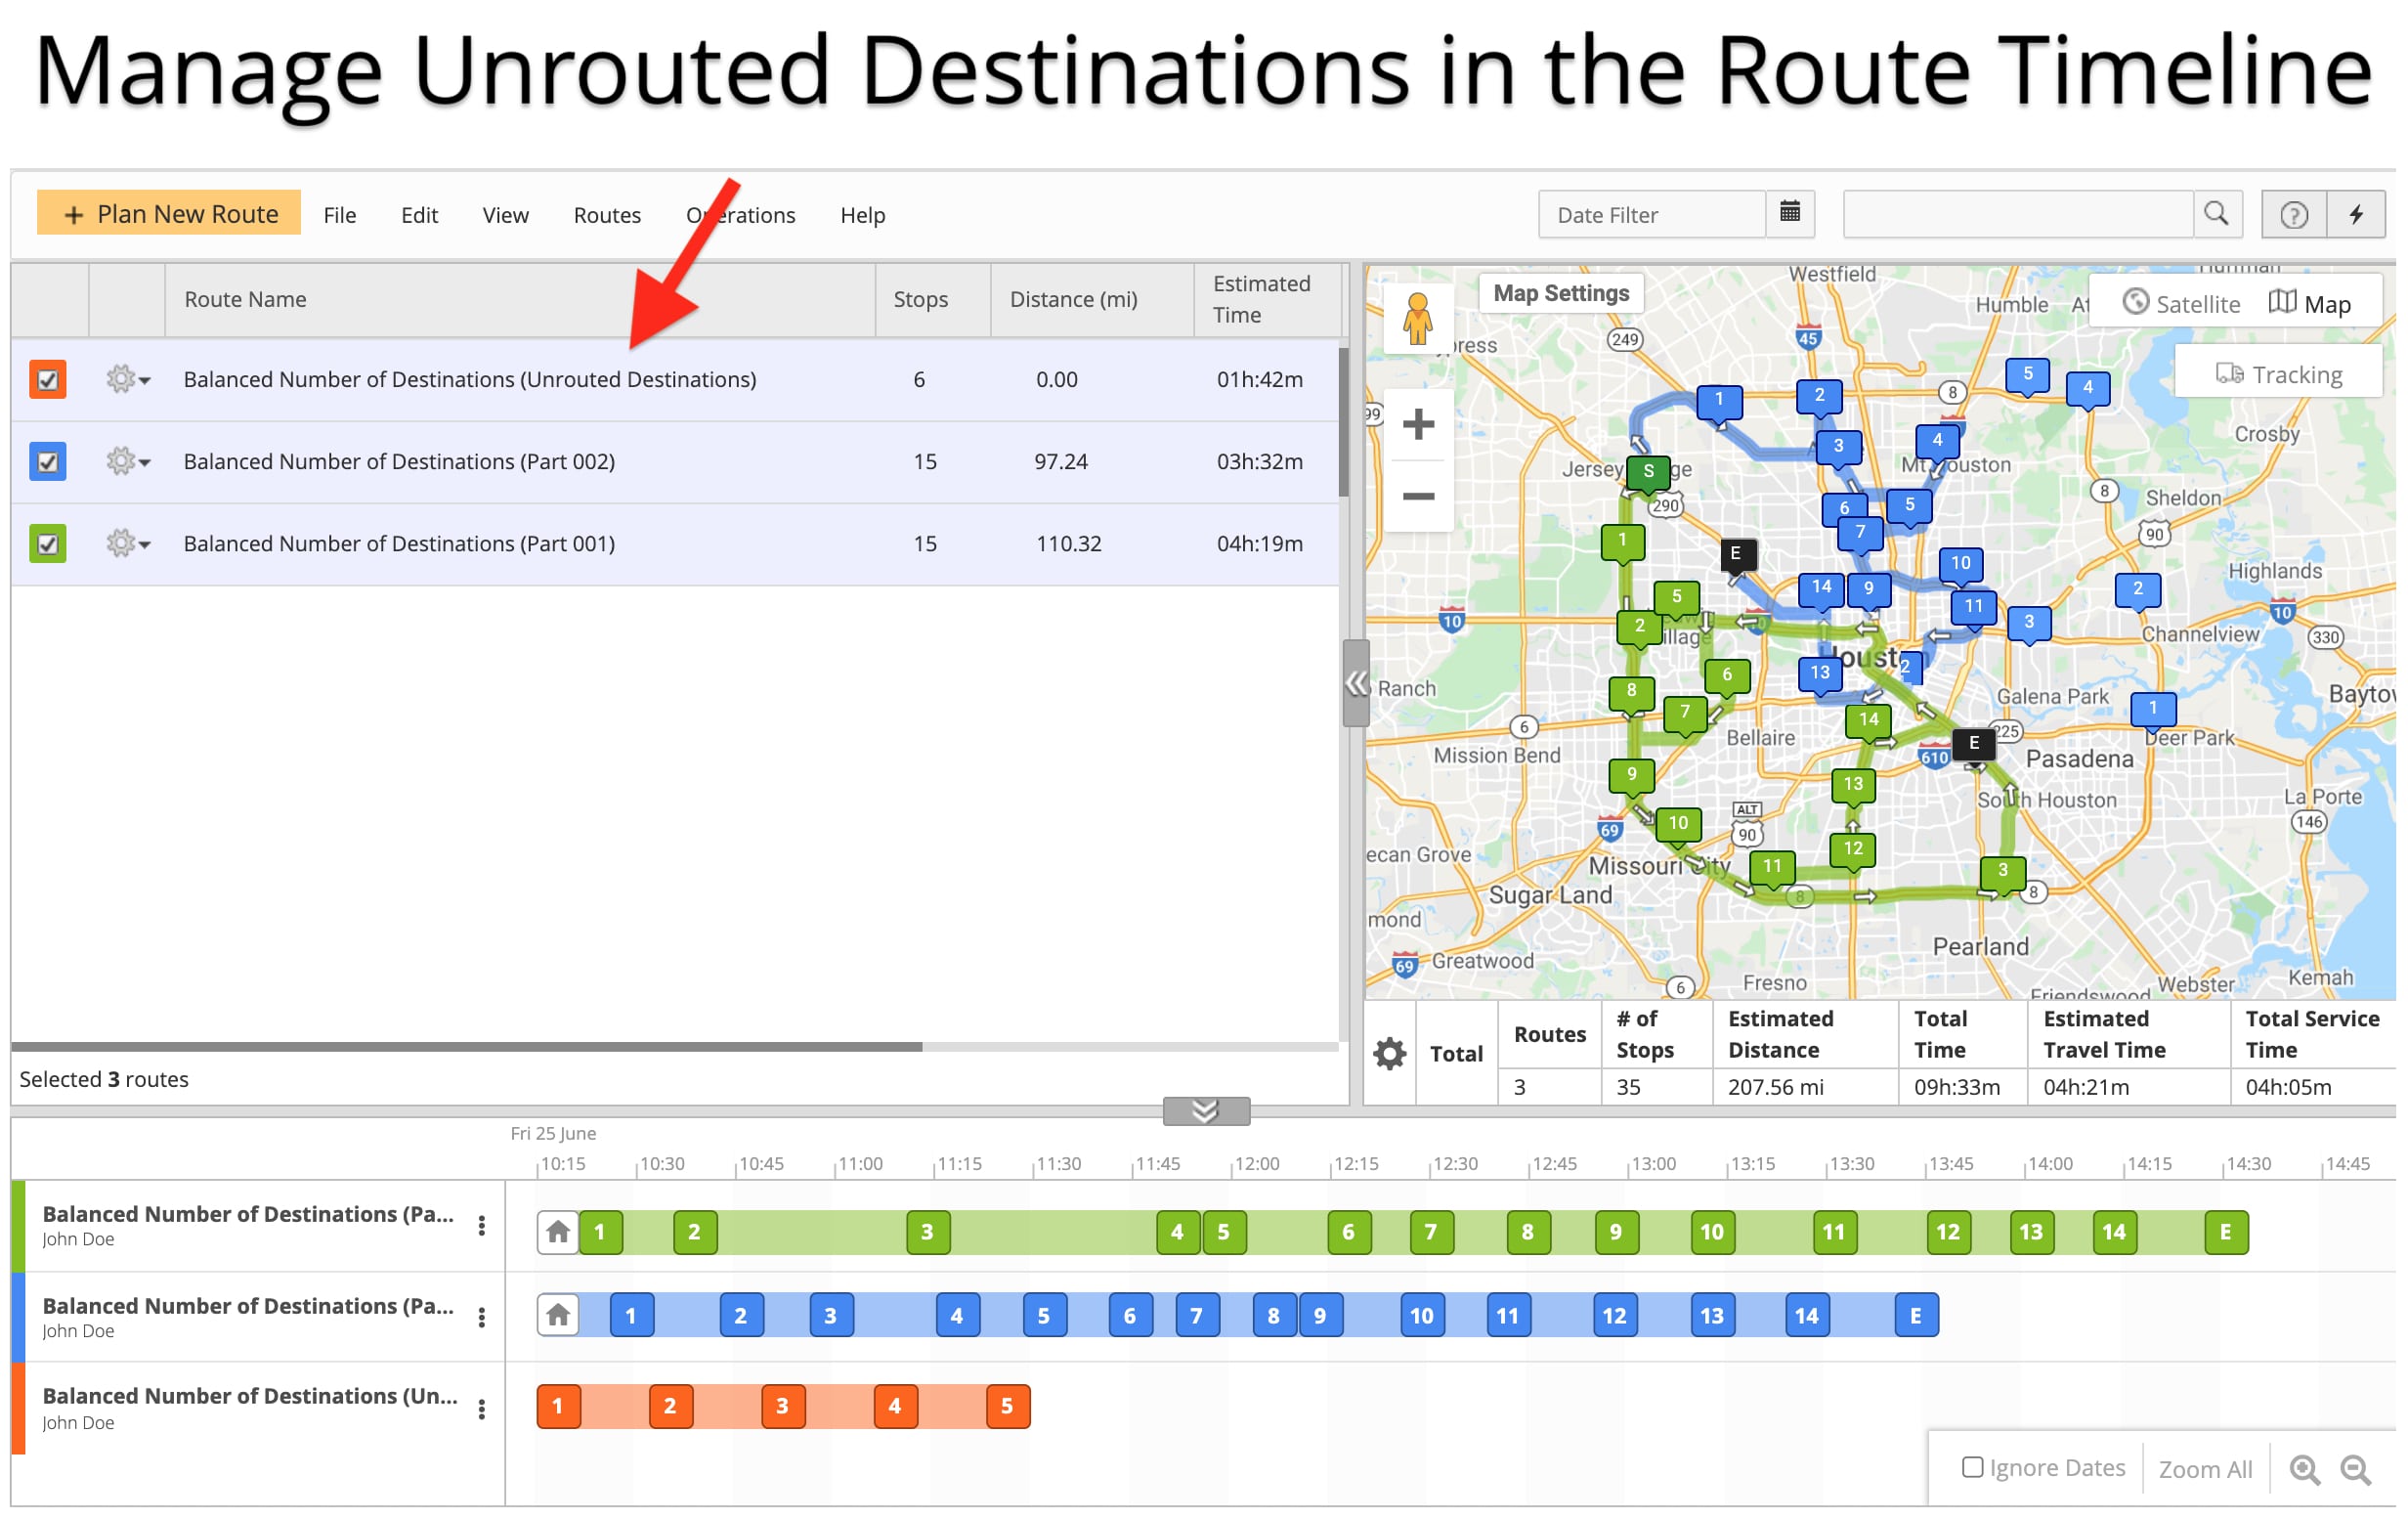 Manage unrouted destinations that didn't fit into balanced routes due to optimization constraints.